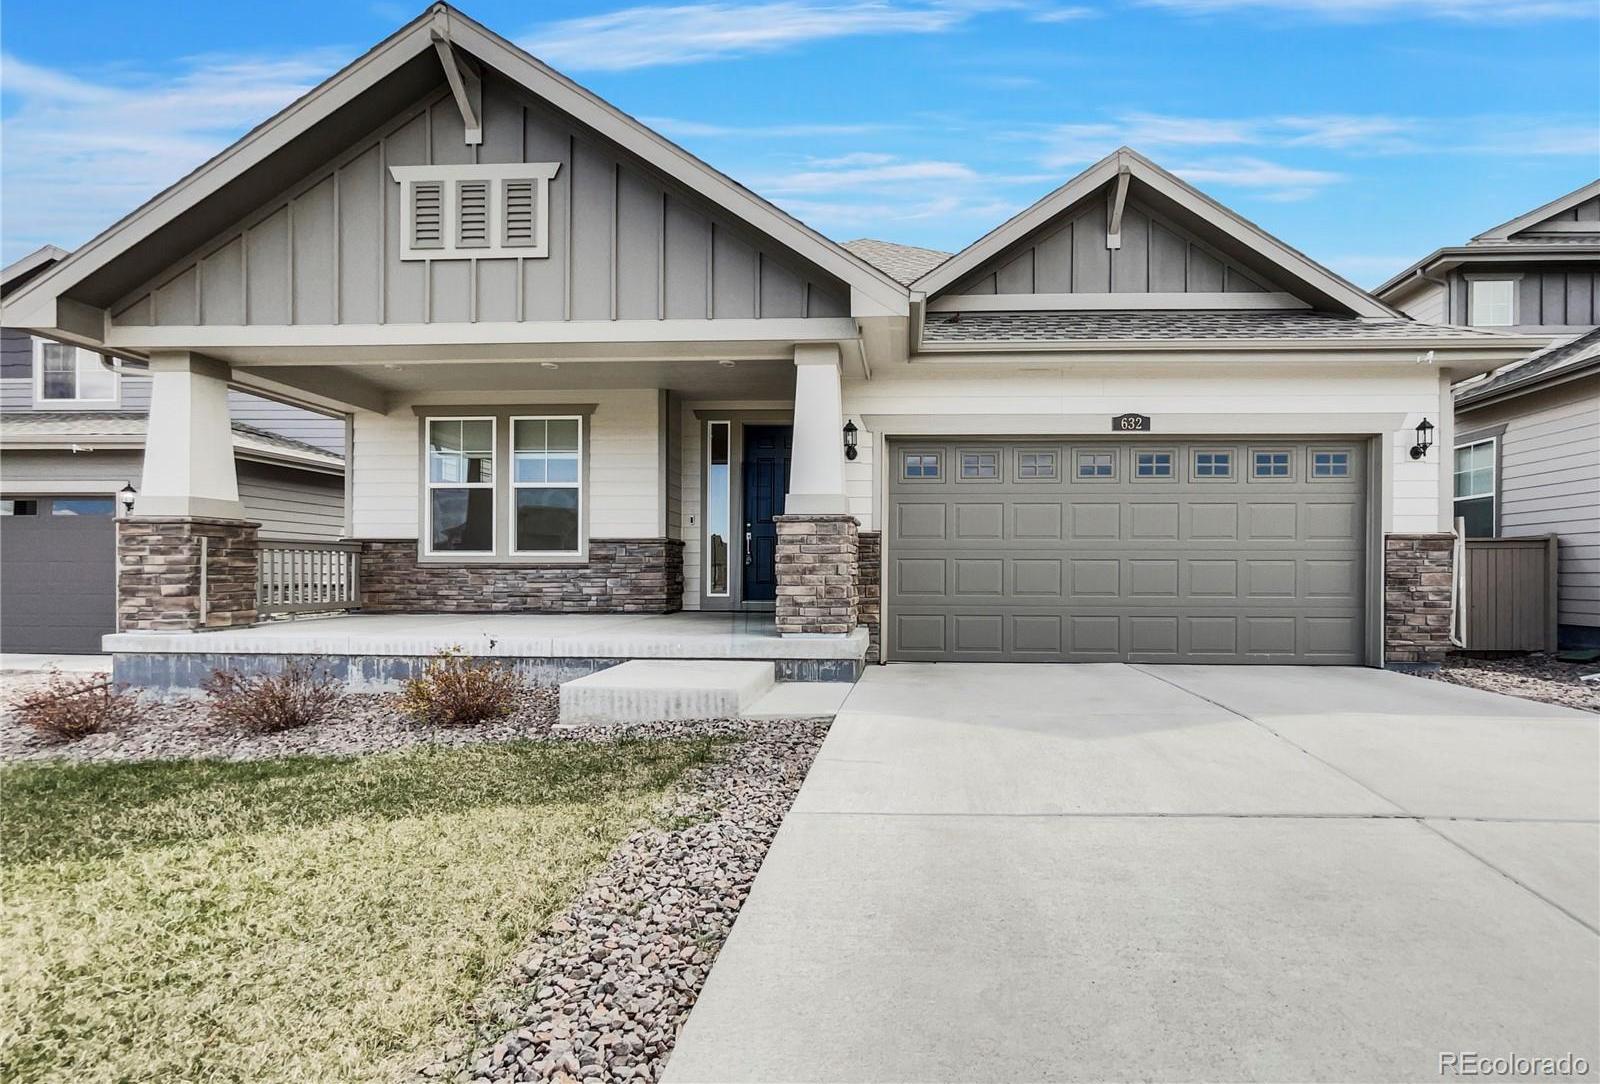 Photo one of 632 Netta Dr Broomfield CO 80023 | MLS 7011013